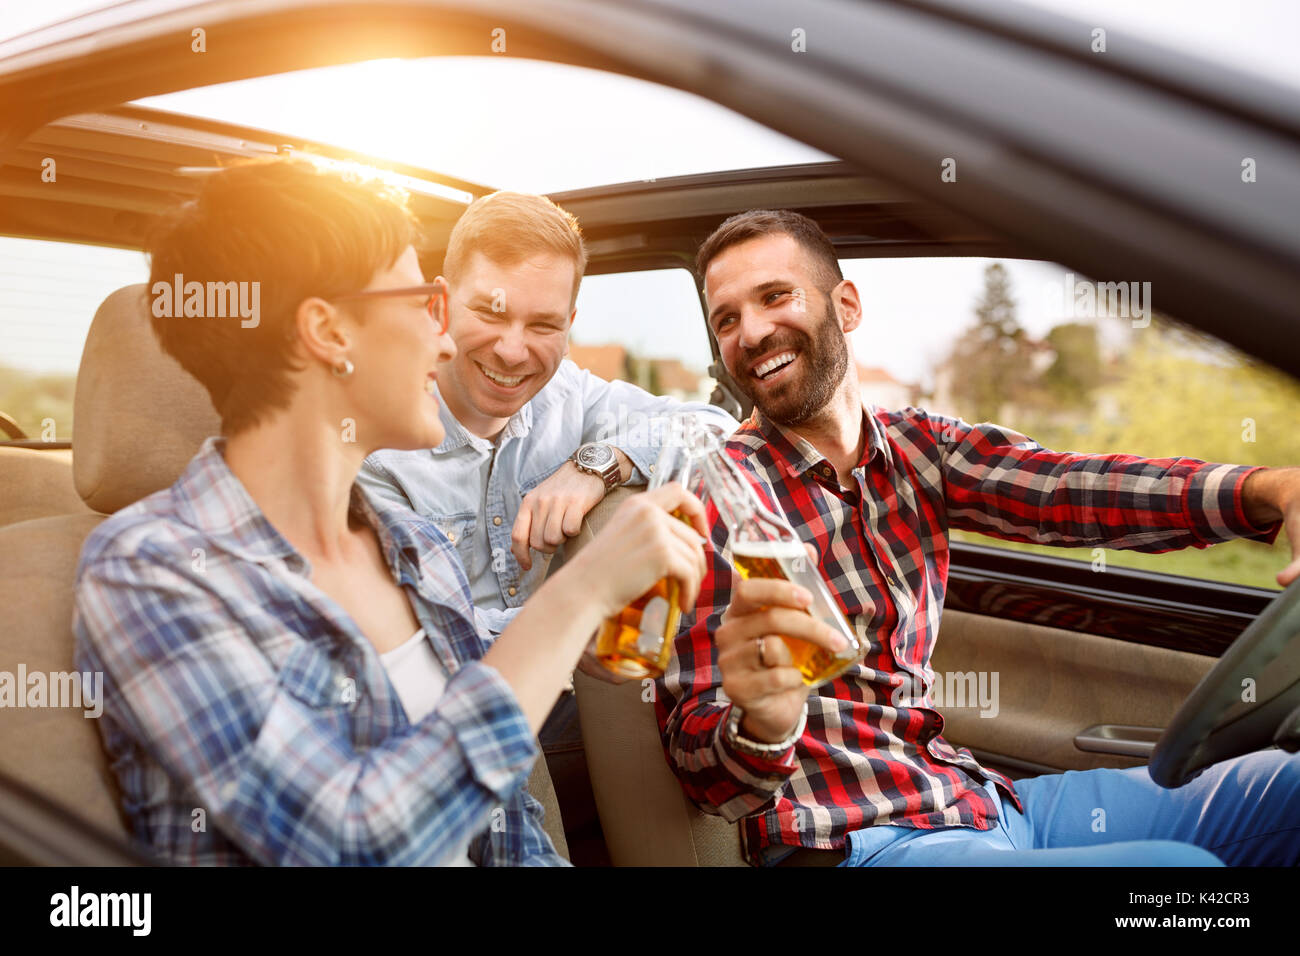 smiling friends having fun in the car on road trip Stock Photo